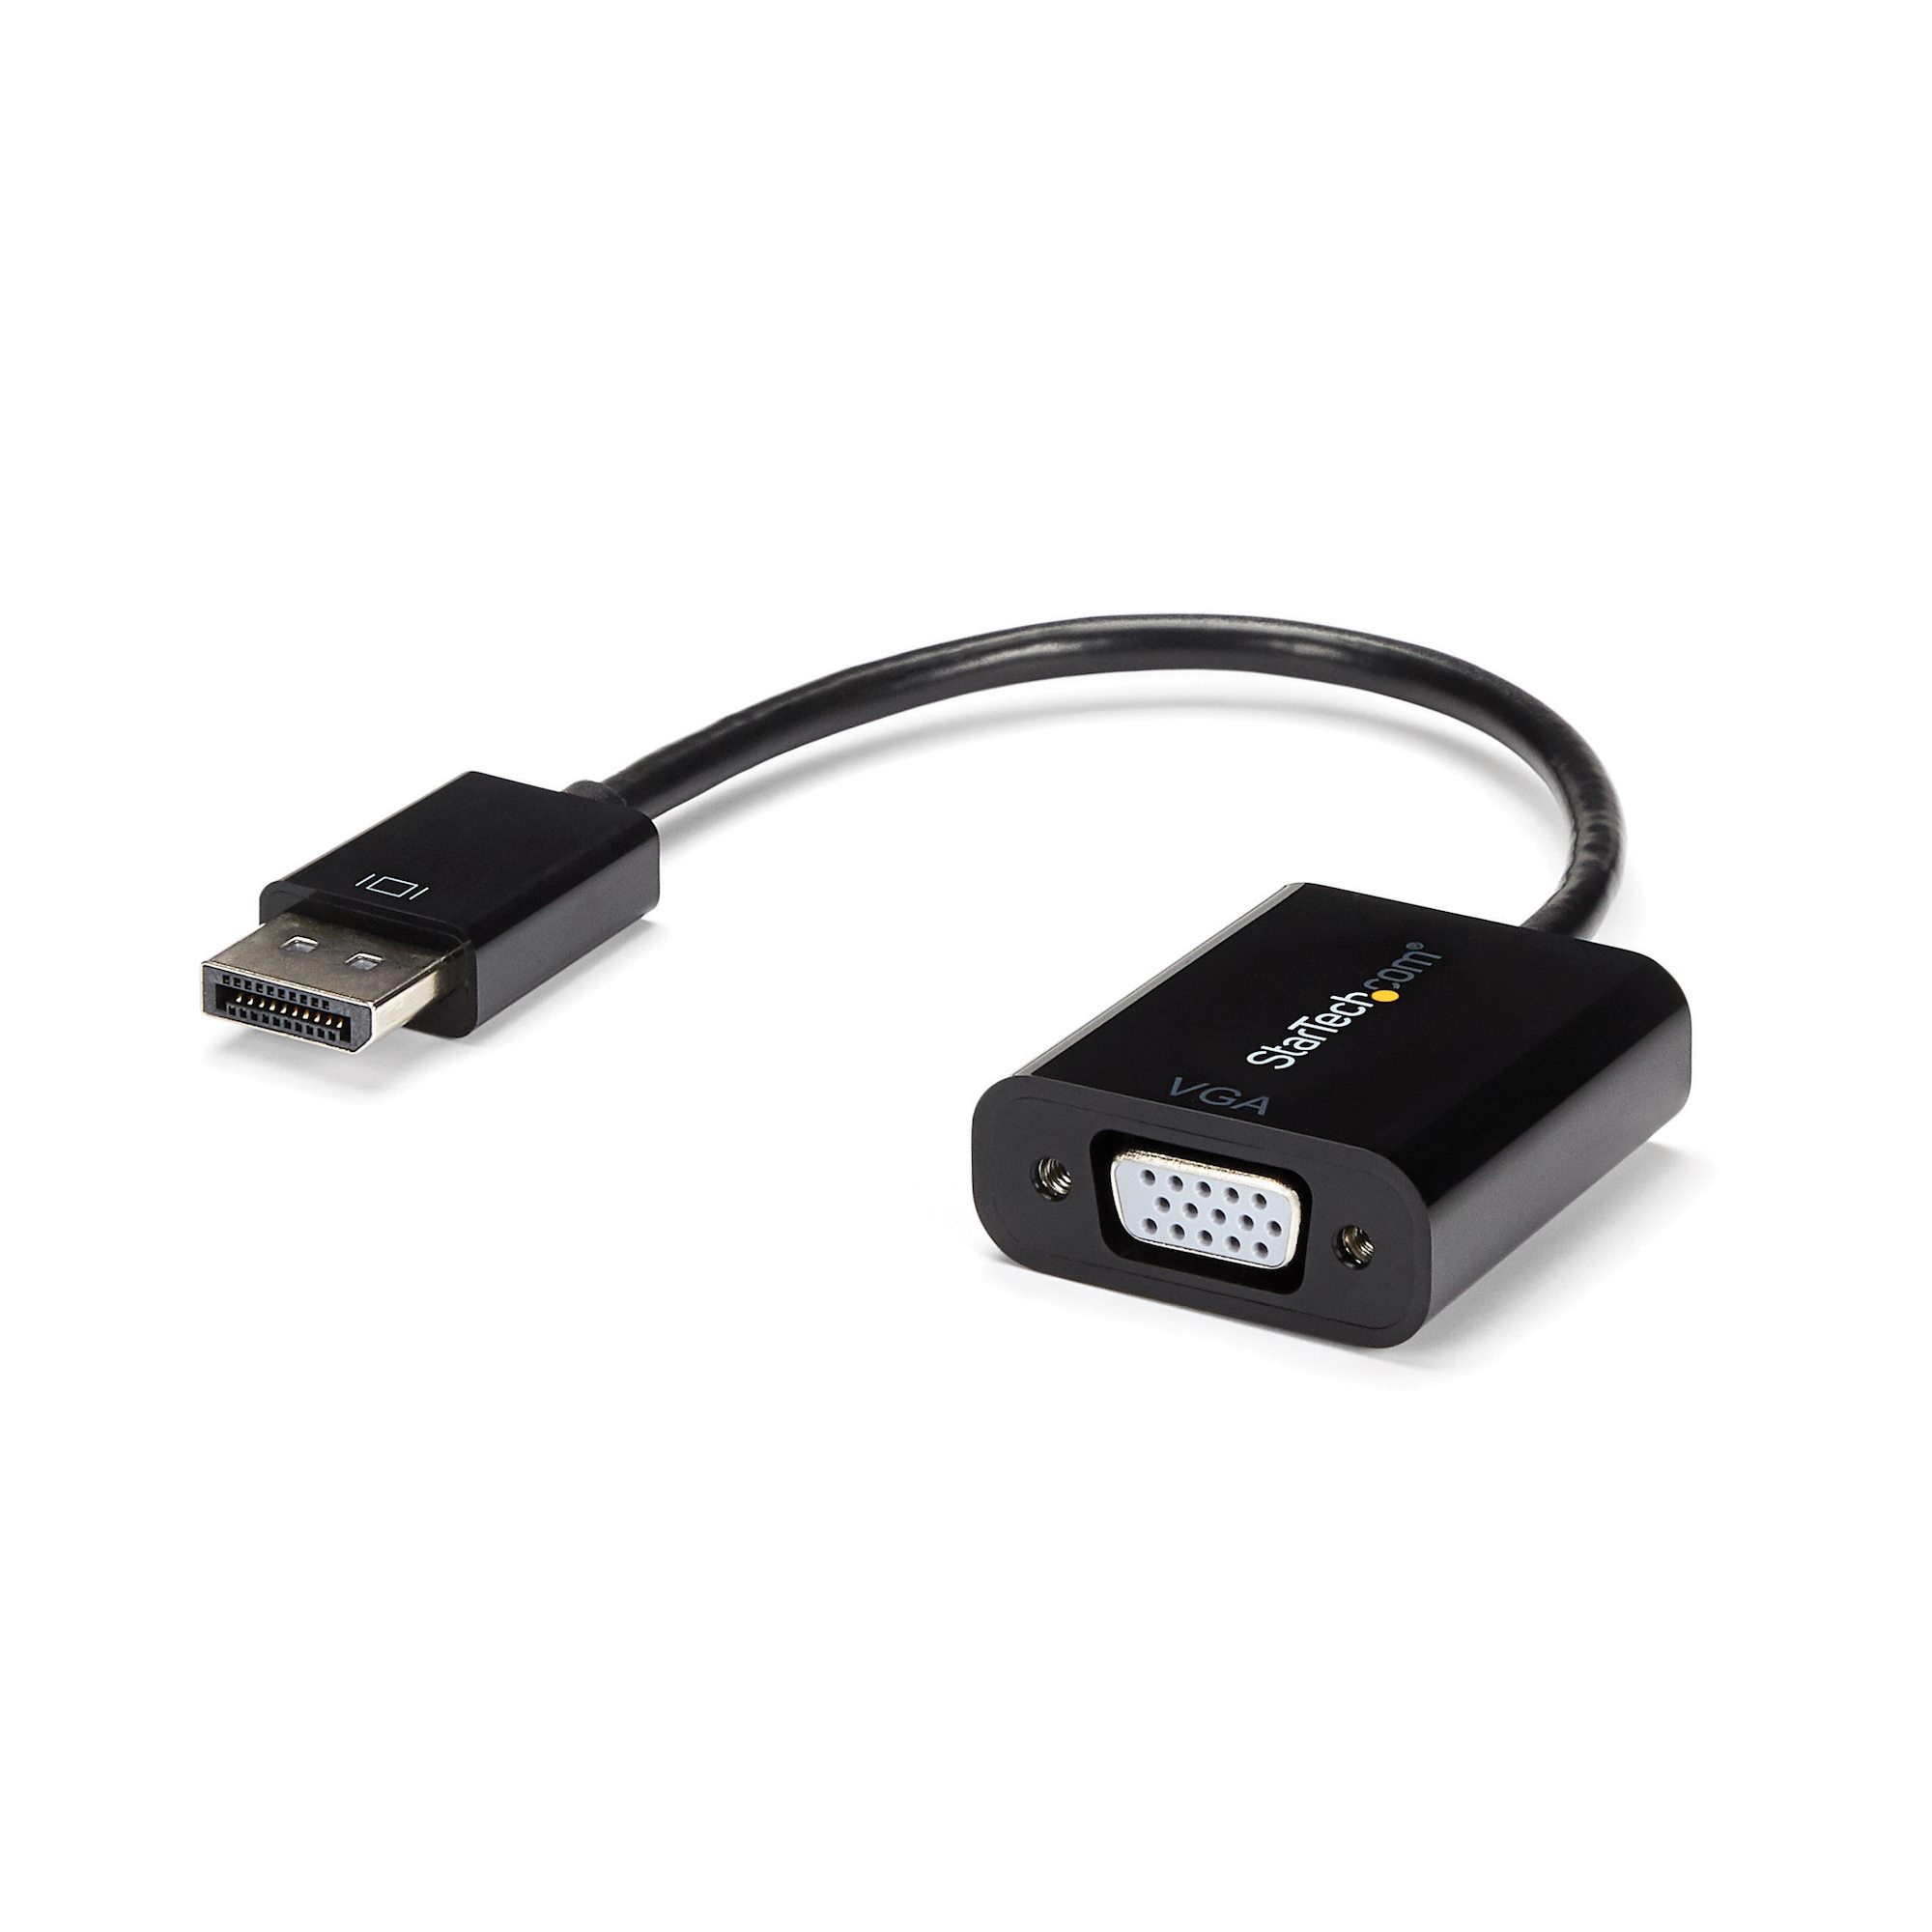 Display Port DP Male to VGA Female Video Converter Adapter Cable for PC Laptop 